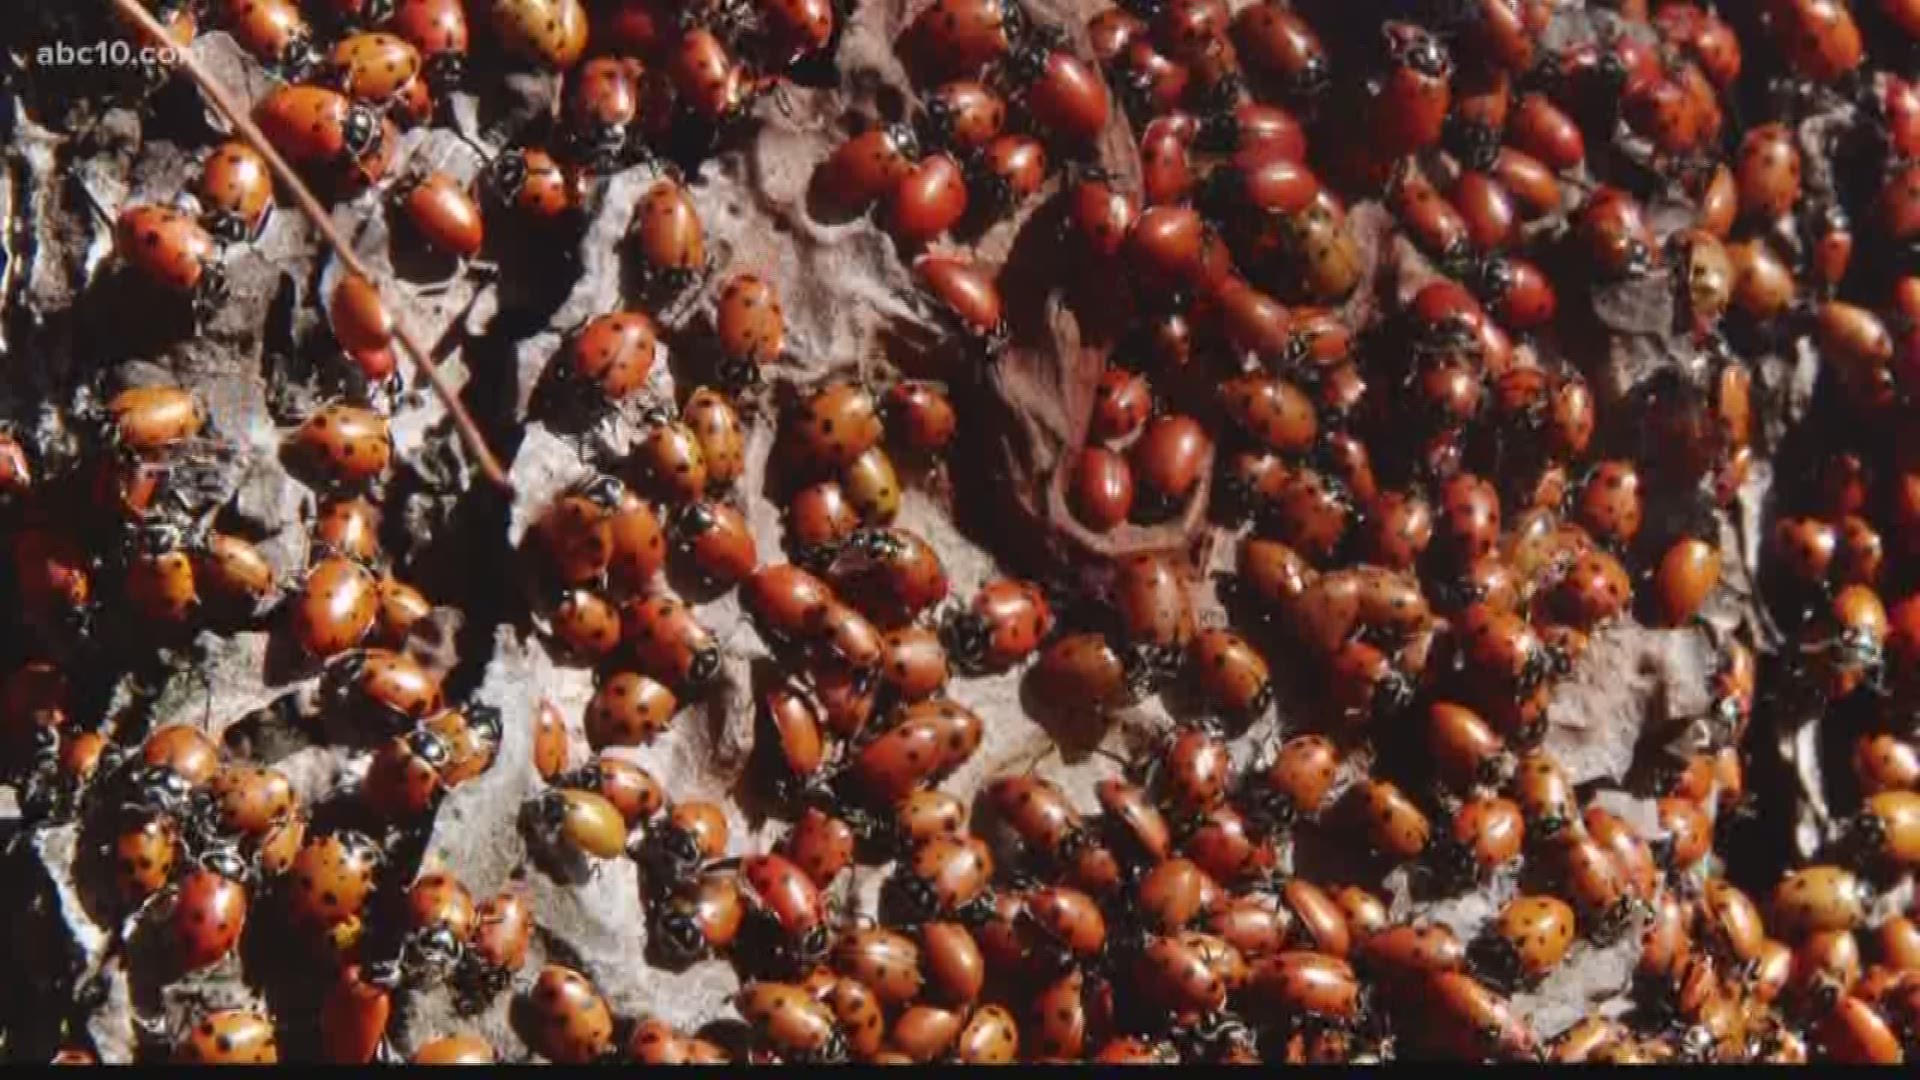 The red and black beetles are used for pest control in organic gardens and they eat bad bugs. Ladybug harvesters collect them in the fall and sell them during the spring gardening season. It's a lucrative business, but its technically illegal and the reas